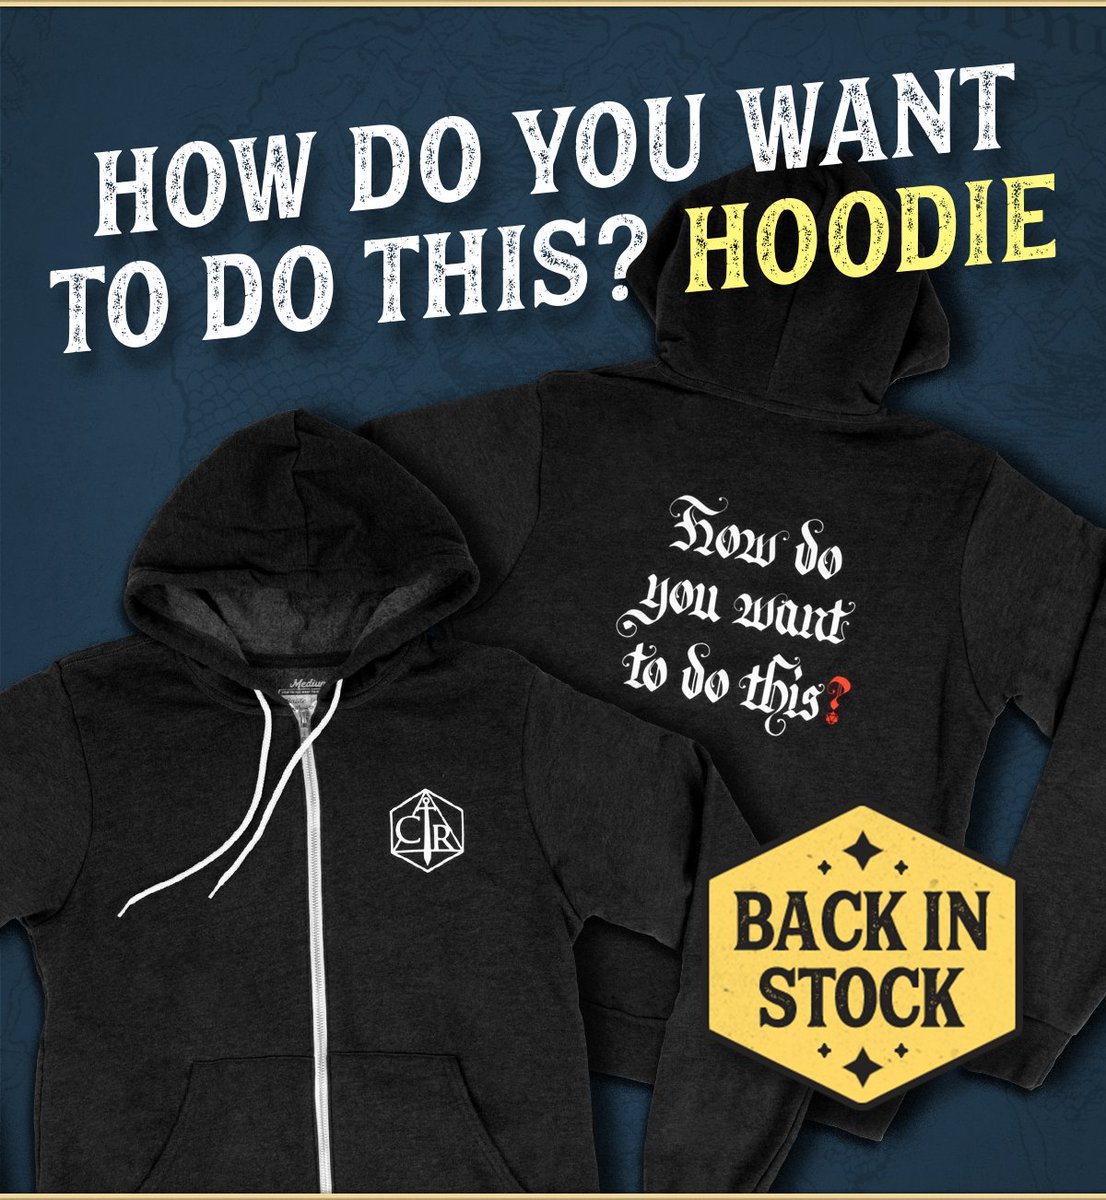 🎲 RESTOCK ALERT 🧥 Our casual-cool How Do You Want To Do This? Hoodie is back in our shops with the all-important question emblazoned on back! 🇺🇸 shop.critrole.com 🇬🇧 shop.critrole.co.uk 🇨🇦 canada.critrole.com 🇦🇺 shop.critrole.com.au 🇪🇺 shop.critrole.eu